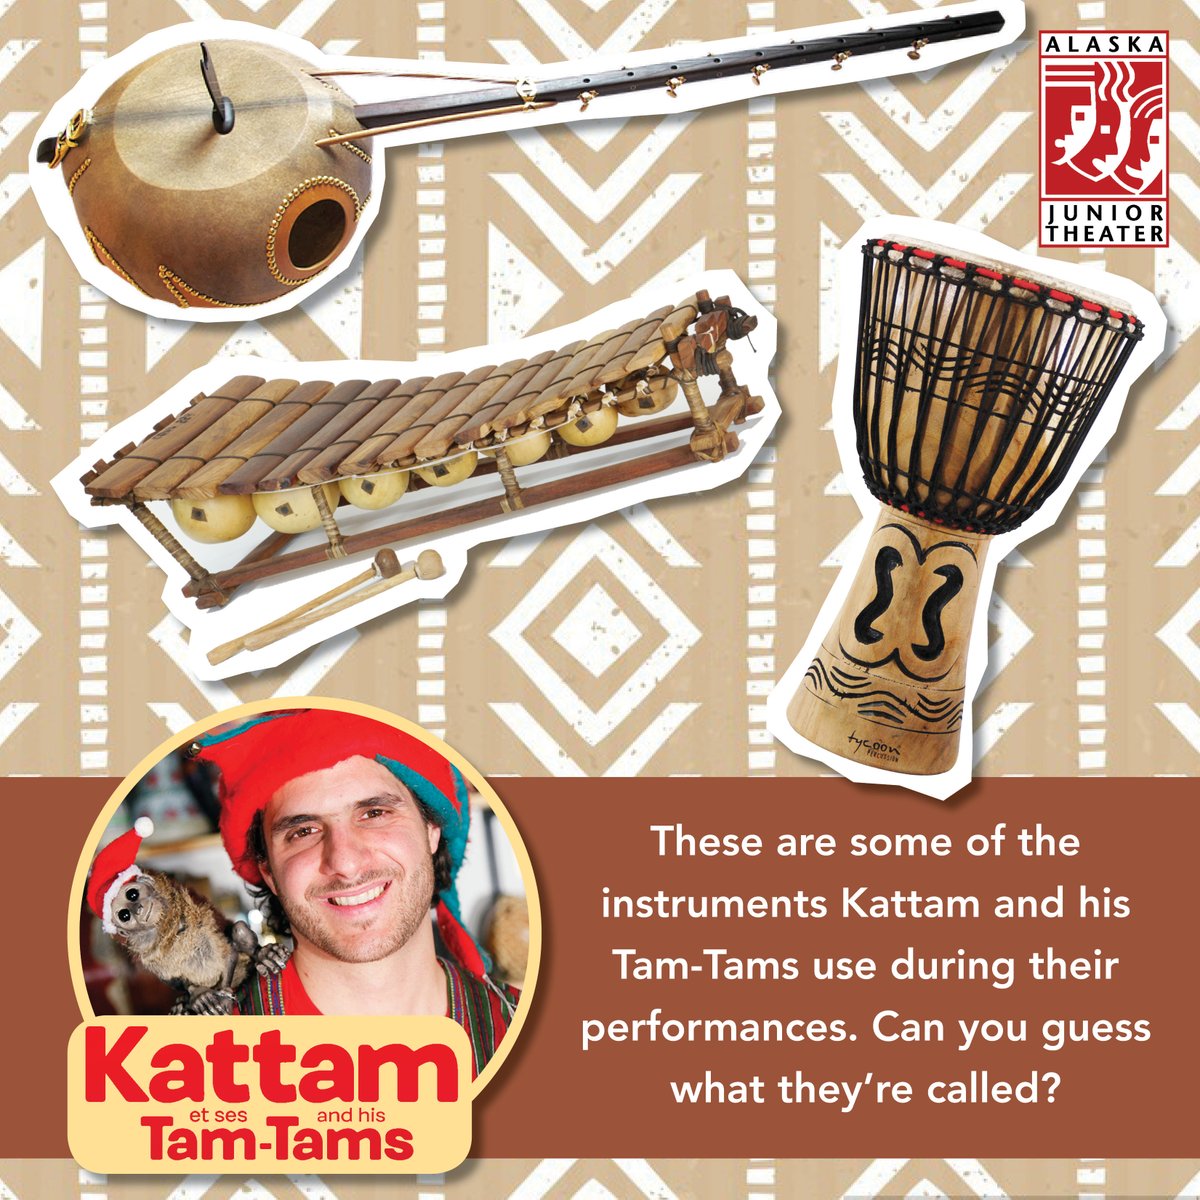 Can you guess the names of these instruments? They're some of the ones Kattam and his Tam-Tams use during their performances! (Answers are on our FB post.) Call 263-ARTS to buy your tix today or call 263-ARTS.

#alaskajuniortheater #alaska #anchorage #thingstodoinalaska #theatre